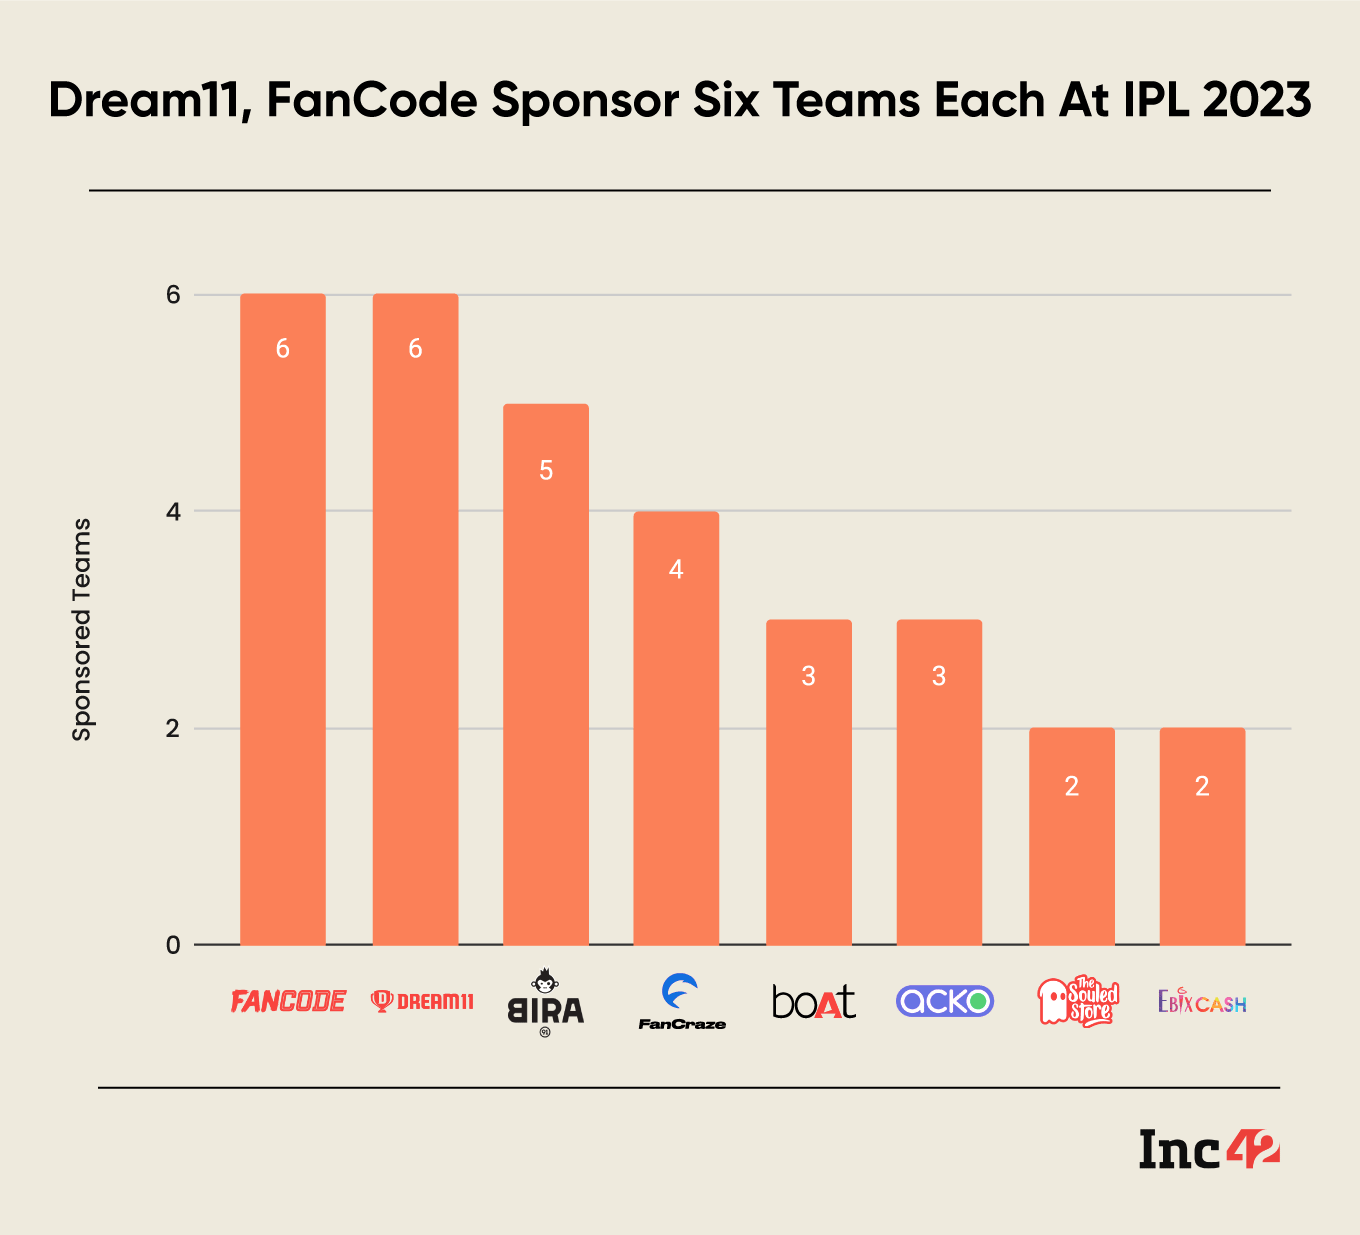 Dream11, FanCode partnered with most teams at IPL 2023